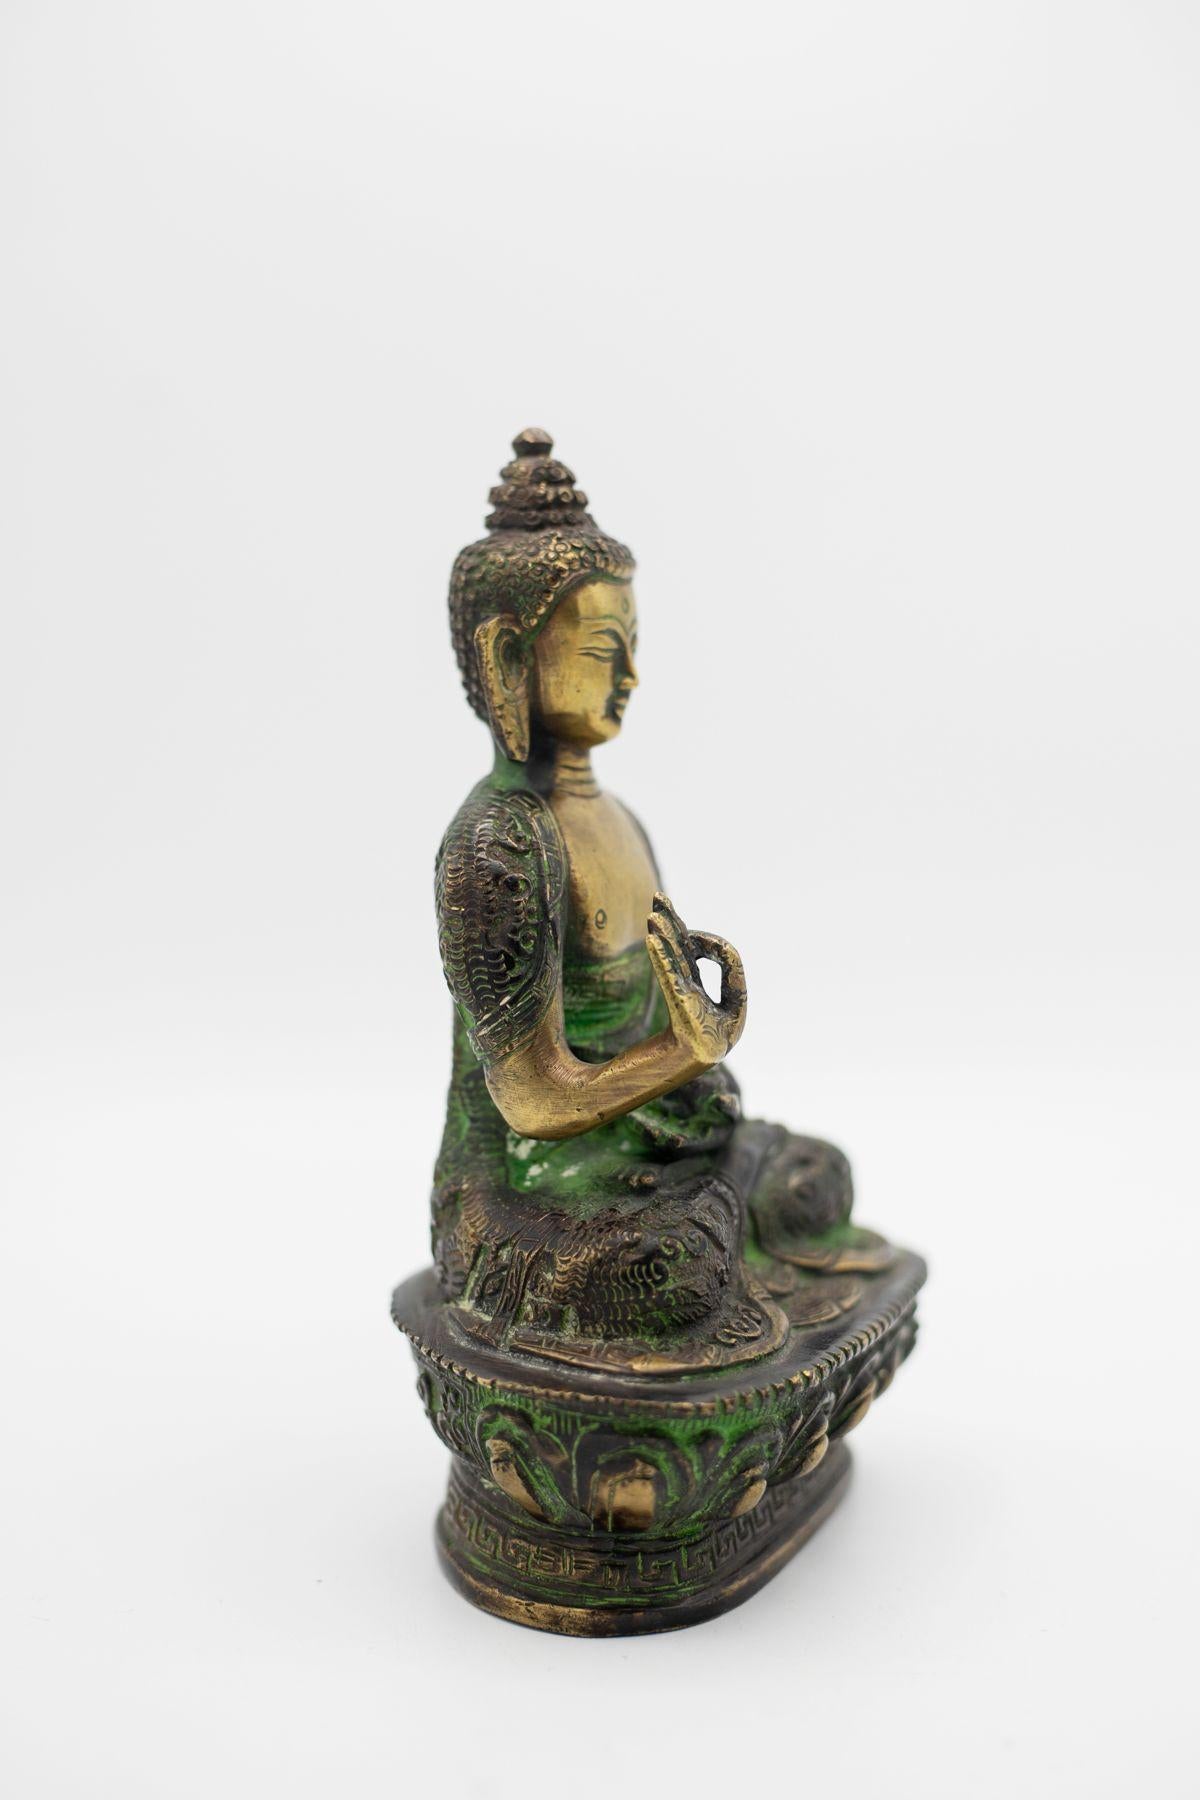 A rare 19th century Tibetan bronze statue depicting the Buddha in the 'healing' posture. He is depicted with a happy and relaxed expression, like the gaze of a carefree person who is doing good, rising above human nature.
This statue is ideal for